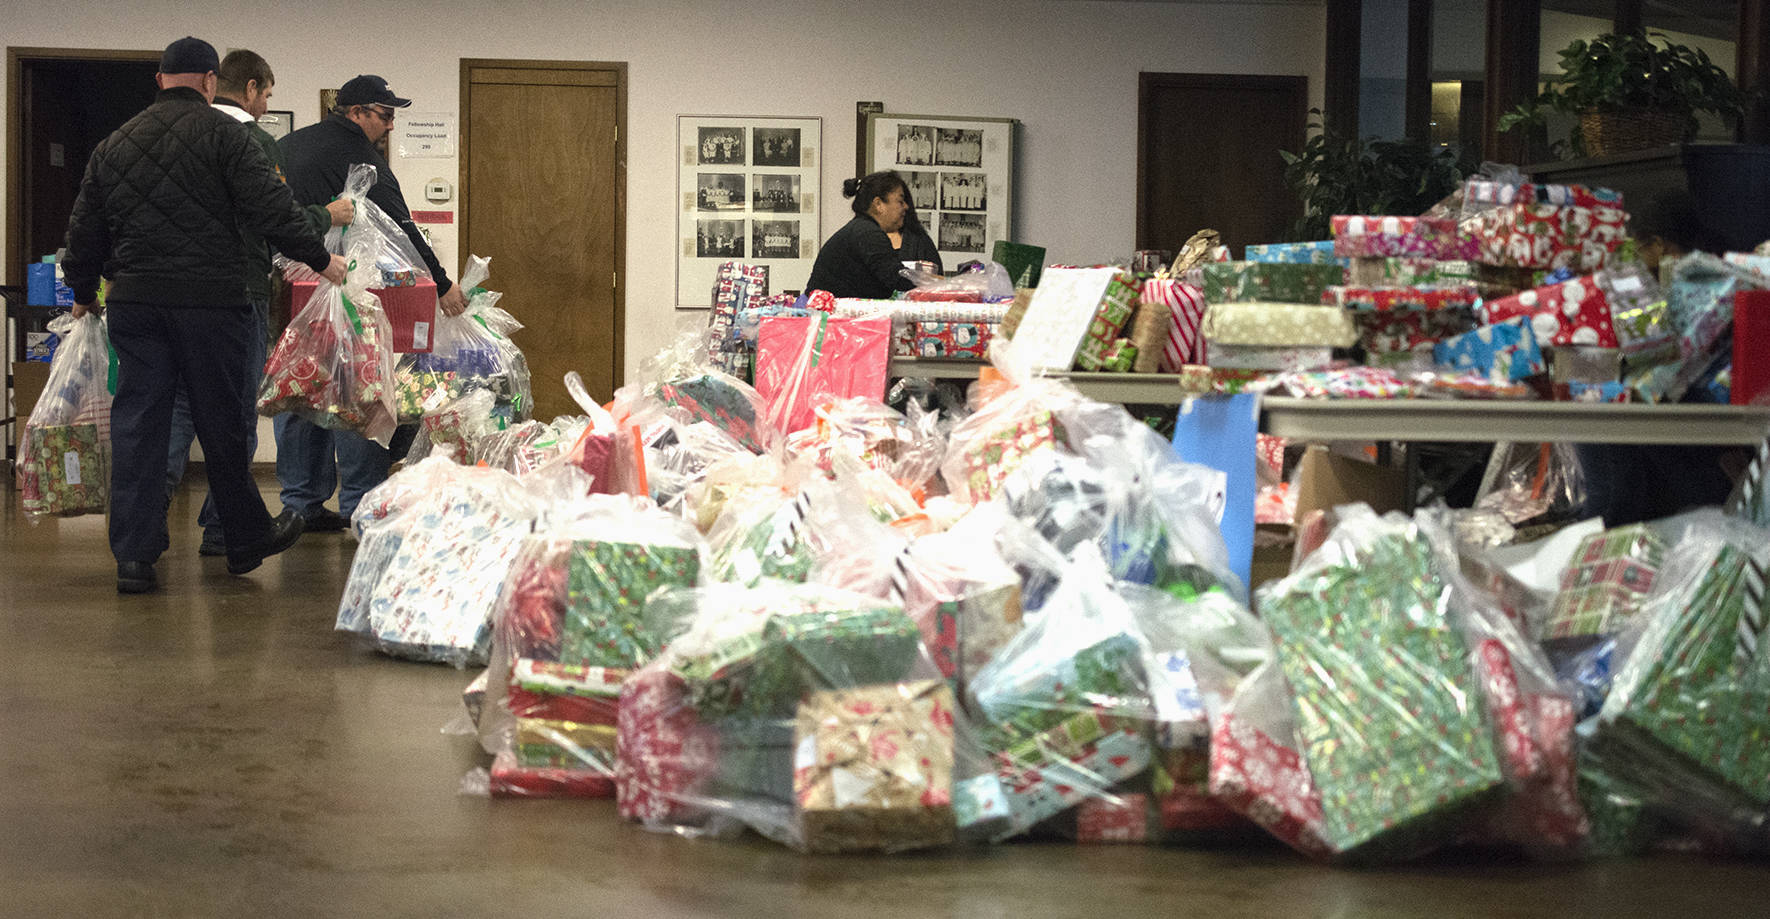 Toys for Joy collects more than 5,000 toys